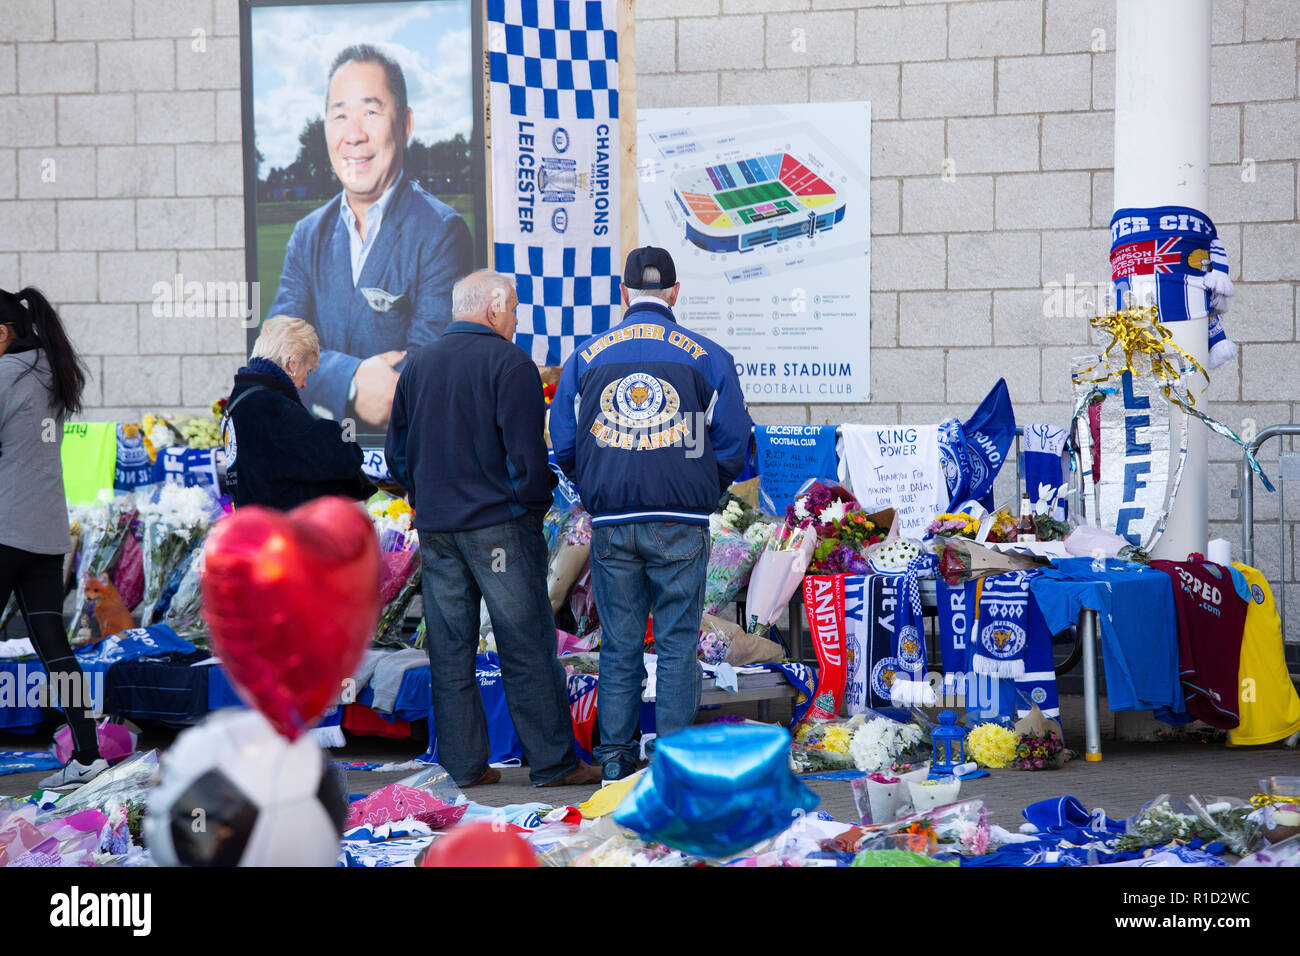 Leicester City Football fans paying their respects outside the stadium after the death of owner Vichai Srivaddhanaprabha in a helicopter crash. Stock Photo